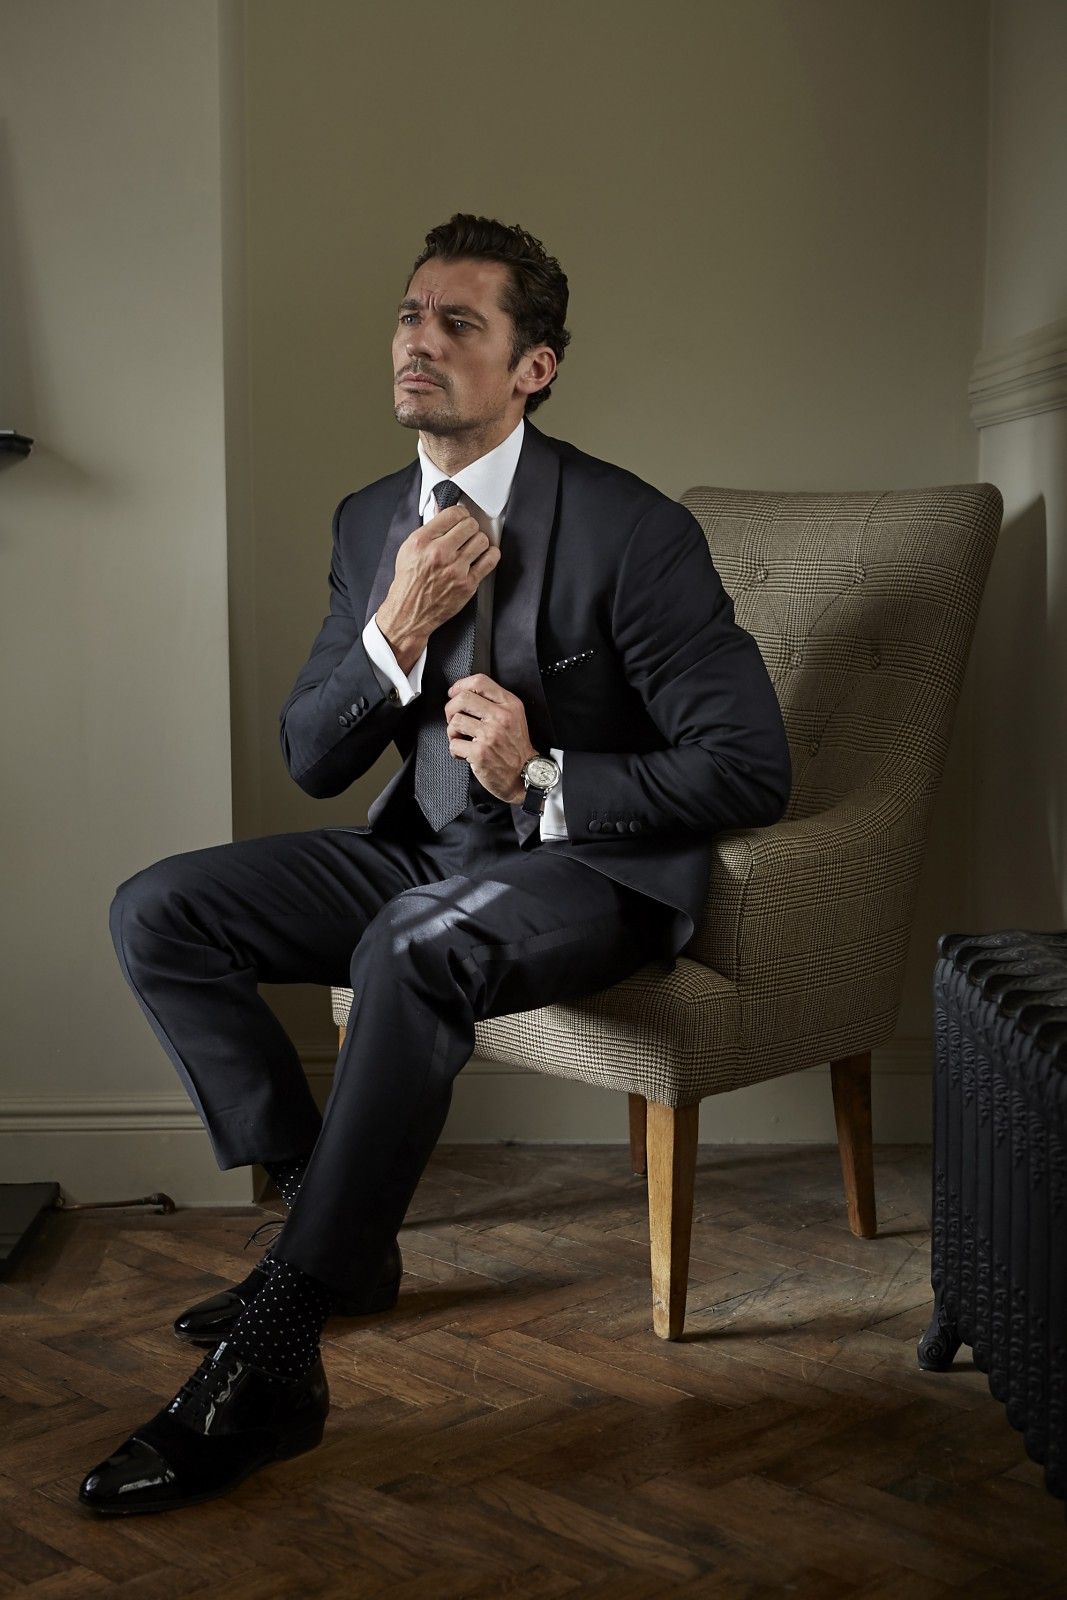 Model David Gandy tightens his tie while sitting on a leather chaior, wearing black tie and socks by London Sock Company.